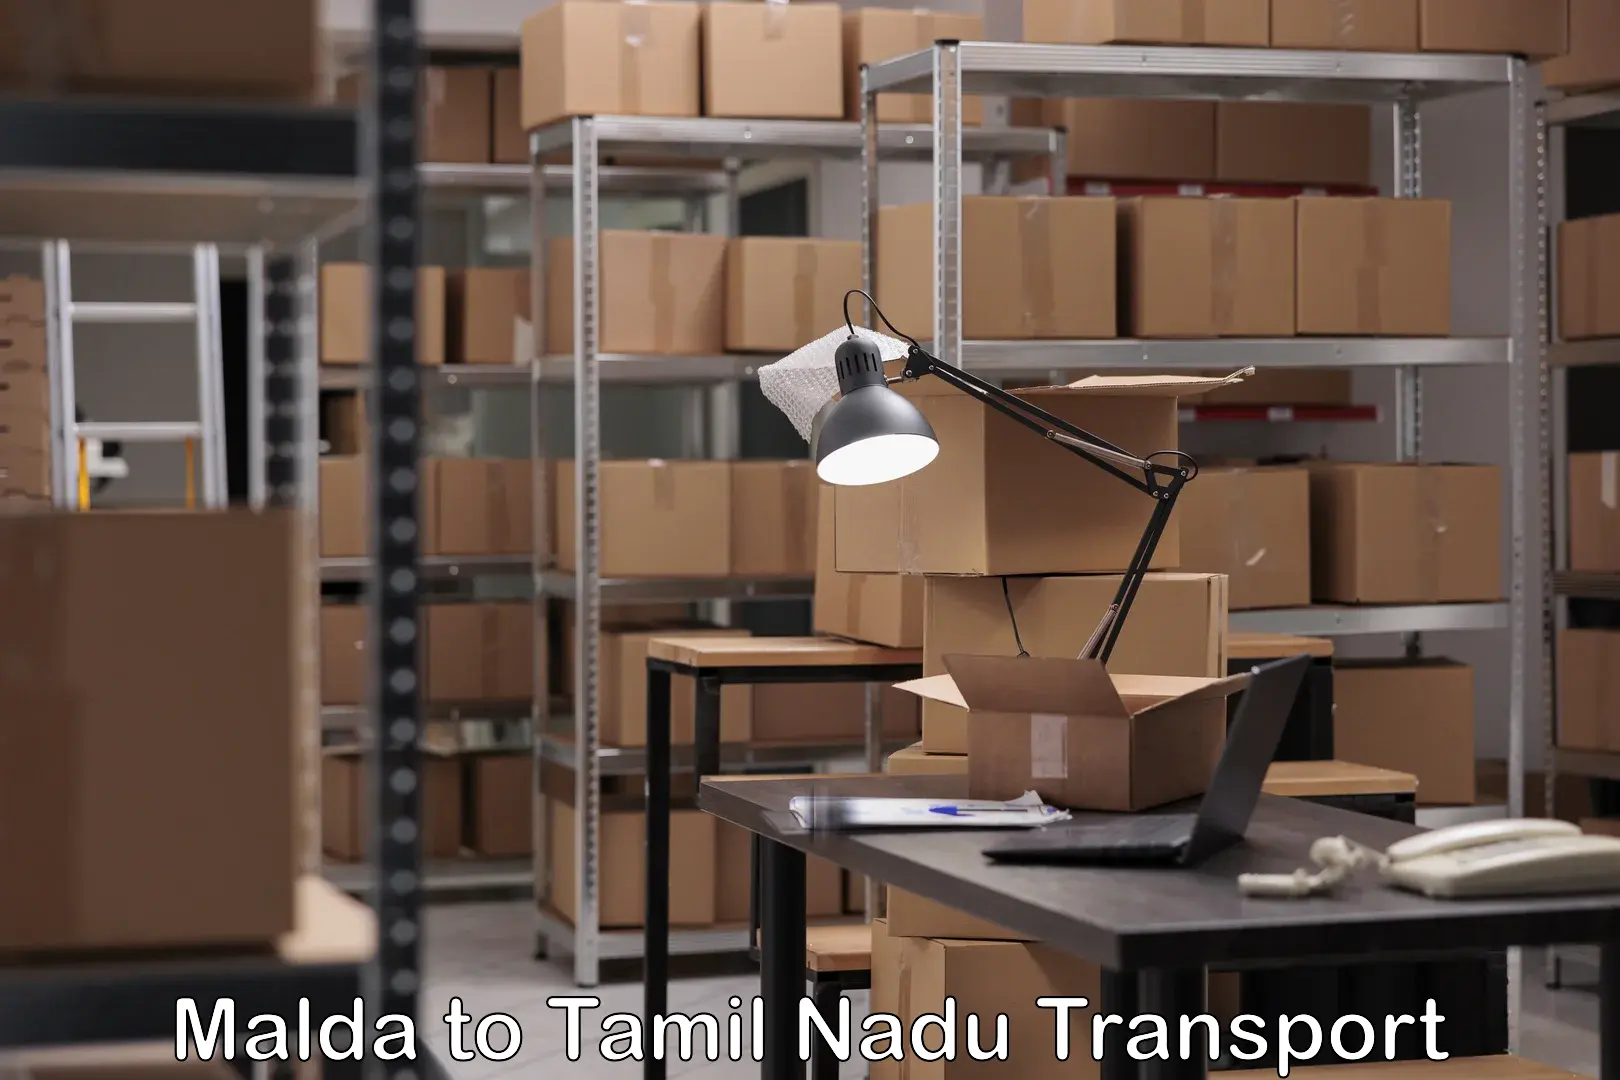 Transport bike from one state to another in Malda to Tamil Nadu